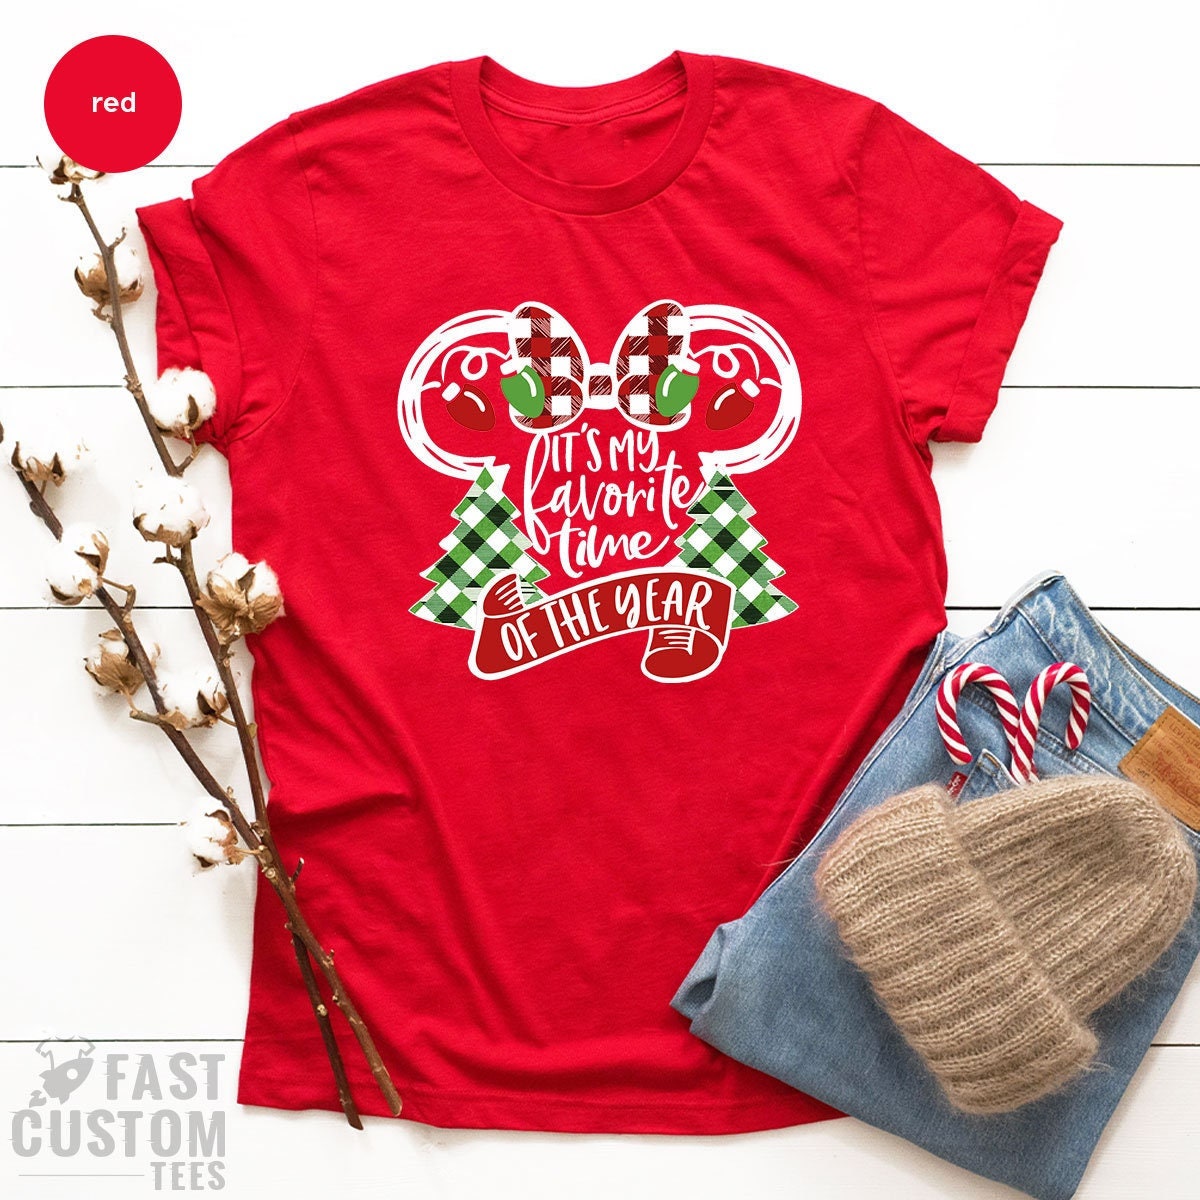 It's My Favorite Time of the Year, Christmas Shirts for Women, Christmas T-Shirt, Christmas Tee, Cute Christmas Shirts, Family Merry Shirt - Fastdeliverytees.com